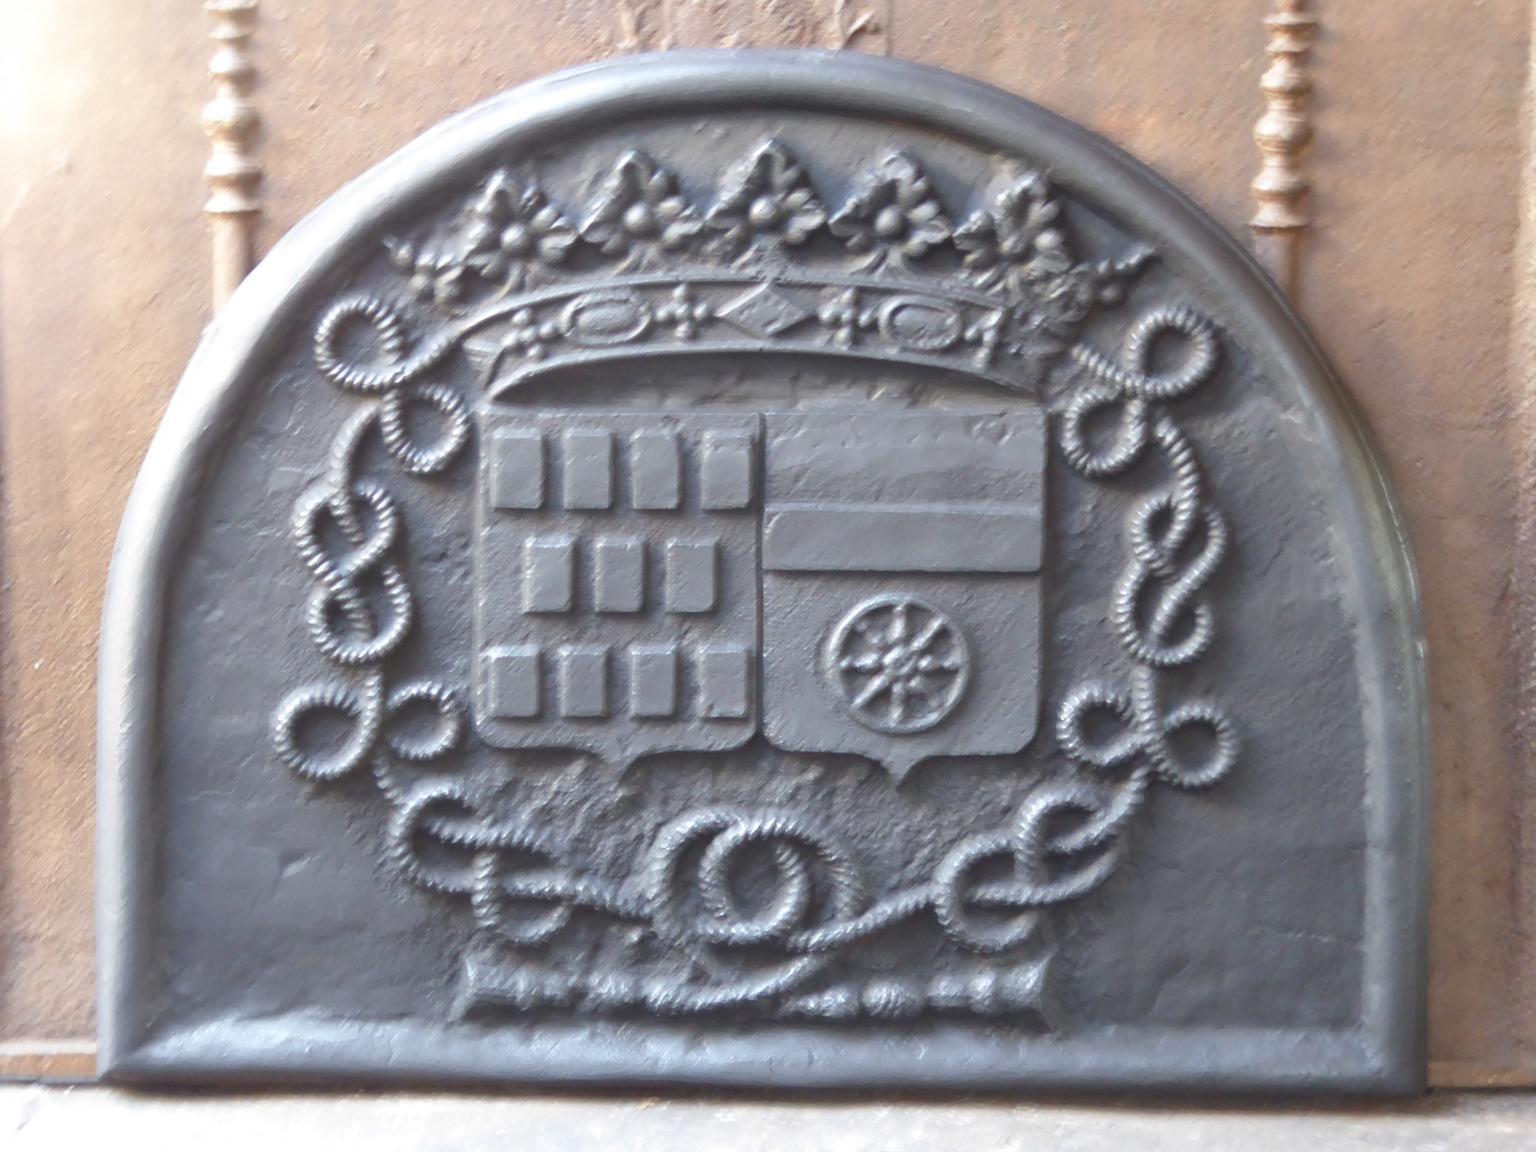 20th century French Louis XIV style fireback with the coat of arms of the De Rostaing Family, 17th century. Described by P. Palasi ('Plaques de cheminées héraldiques'; item 128)

The fireback is made of cast iron and has a black / pewter patina. The